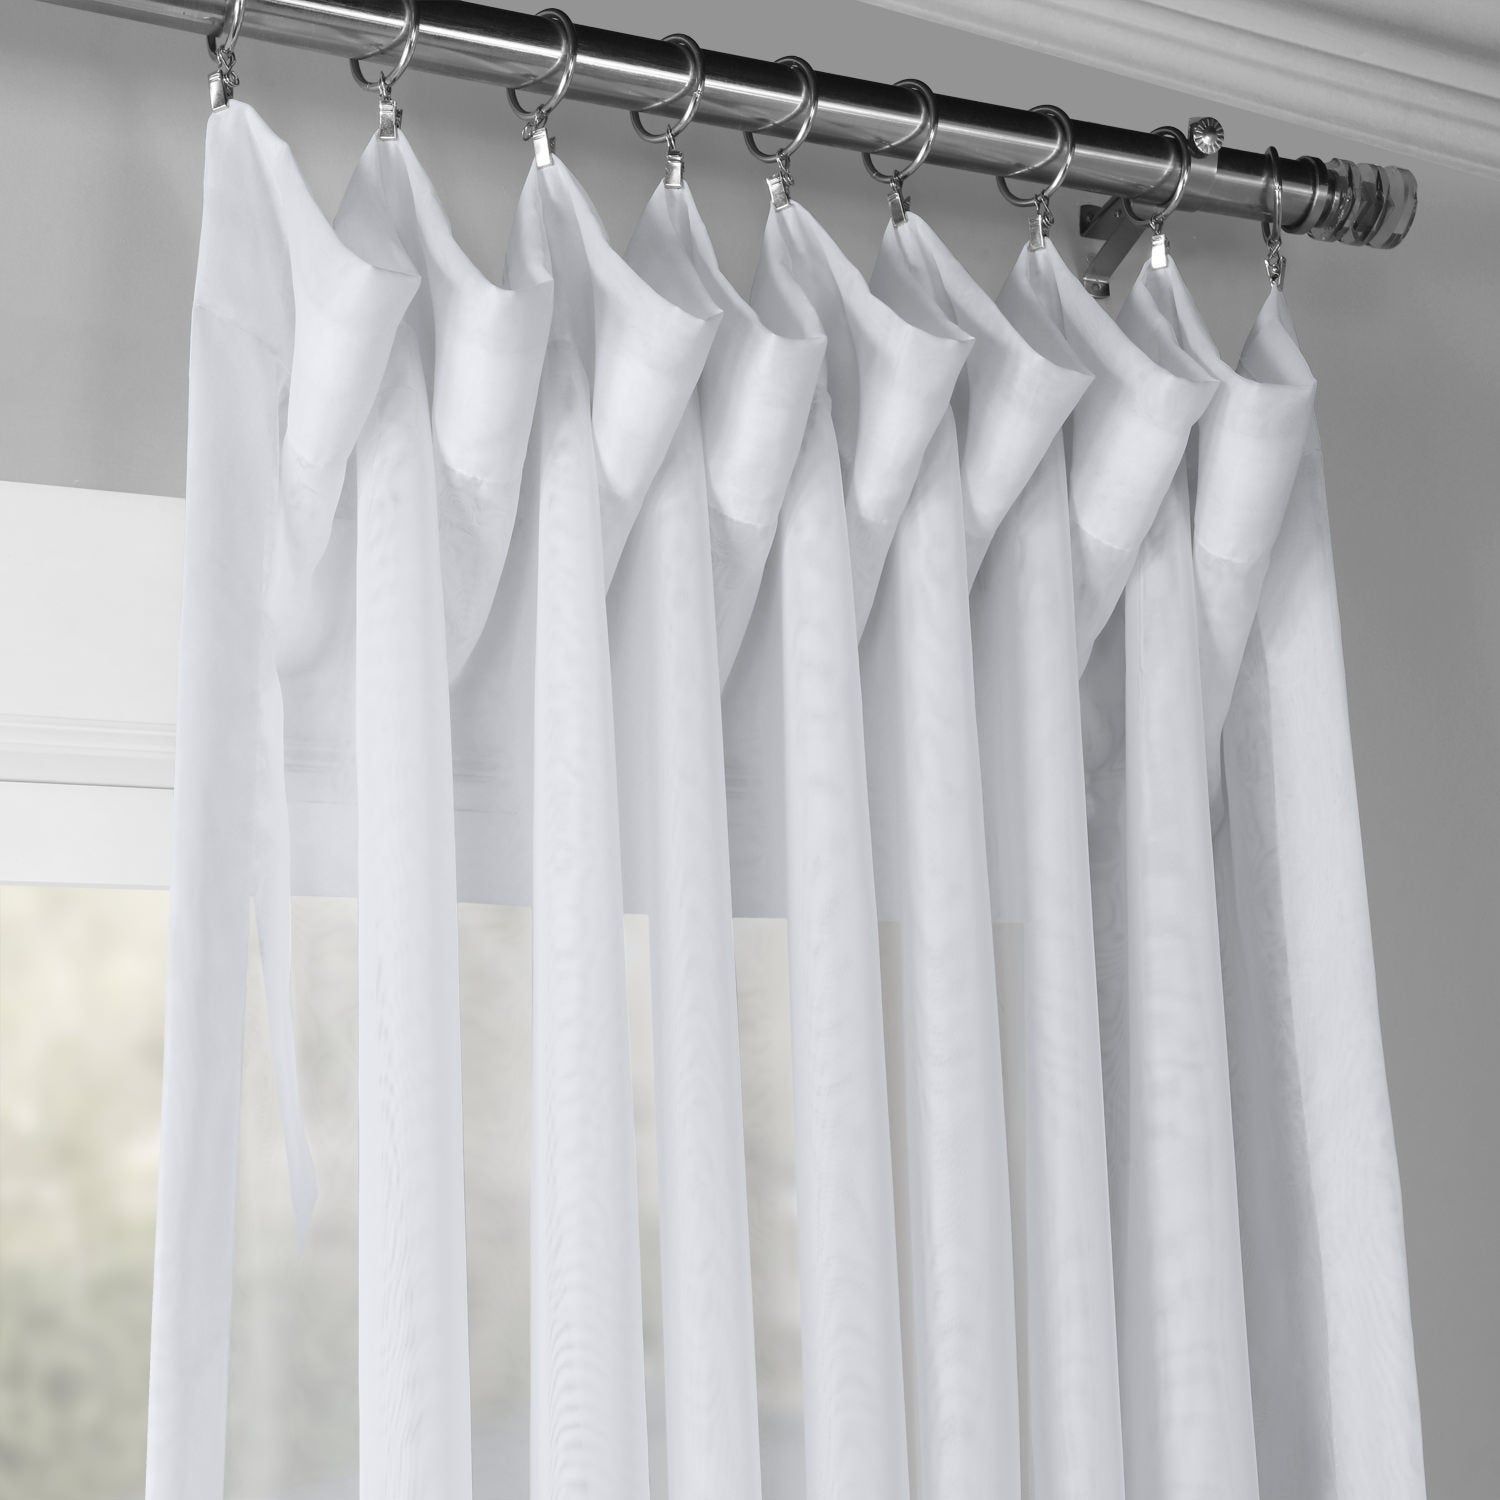 Exclusive Fabrics Double Layer Sheer White Single Curtain Panel With Regard To Double Layer Sheer White Single Curtain Panels (View 3 of 20)